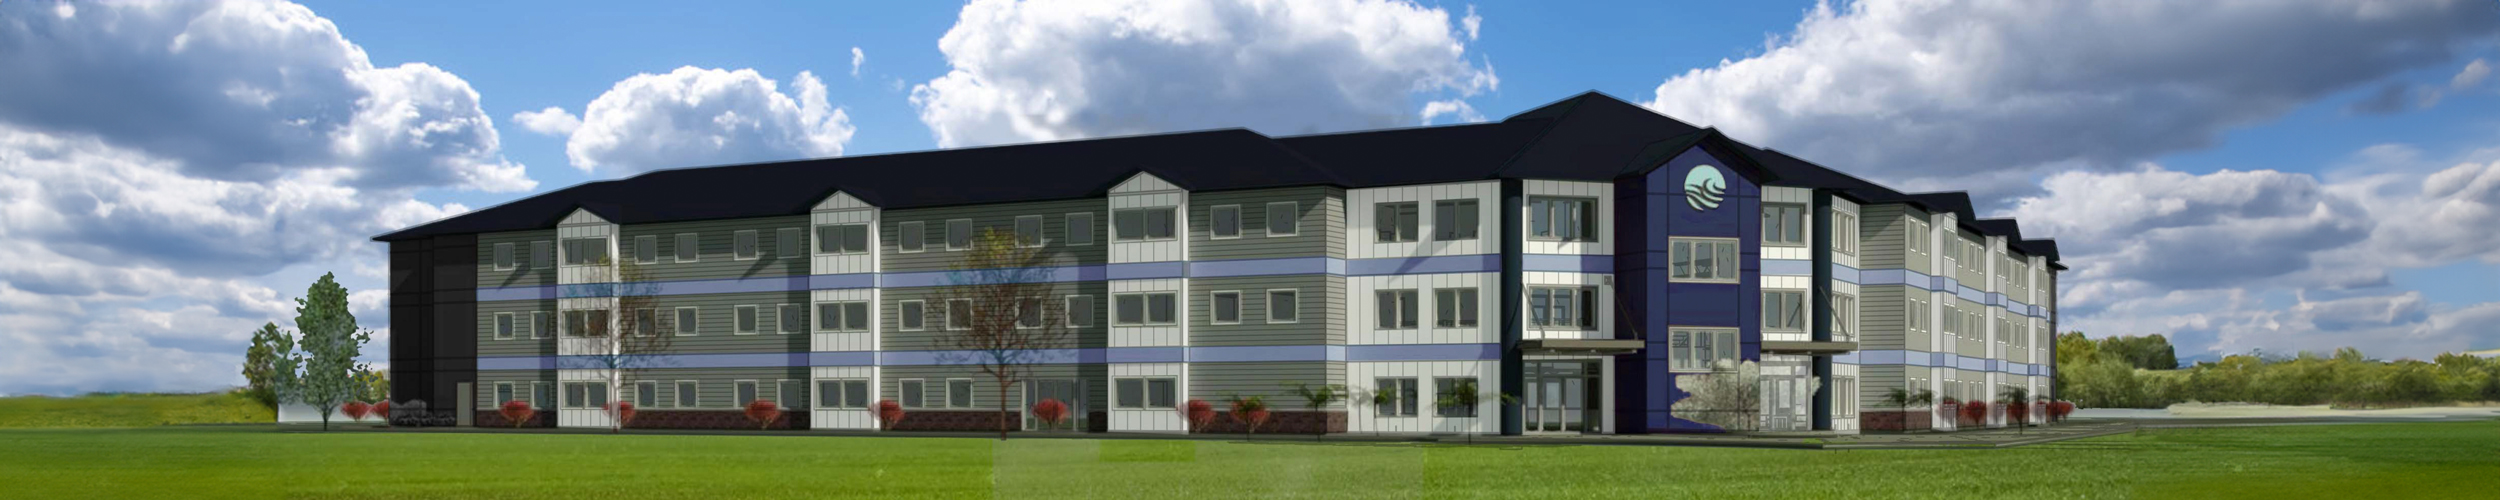 construction, student housing rendering